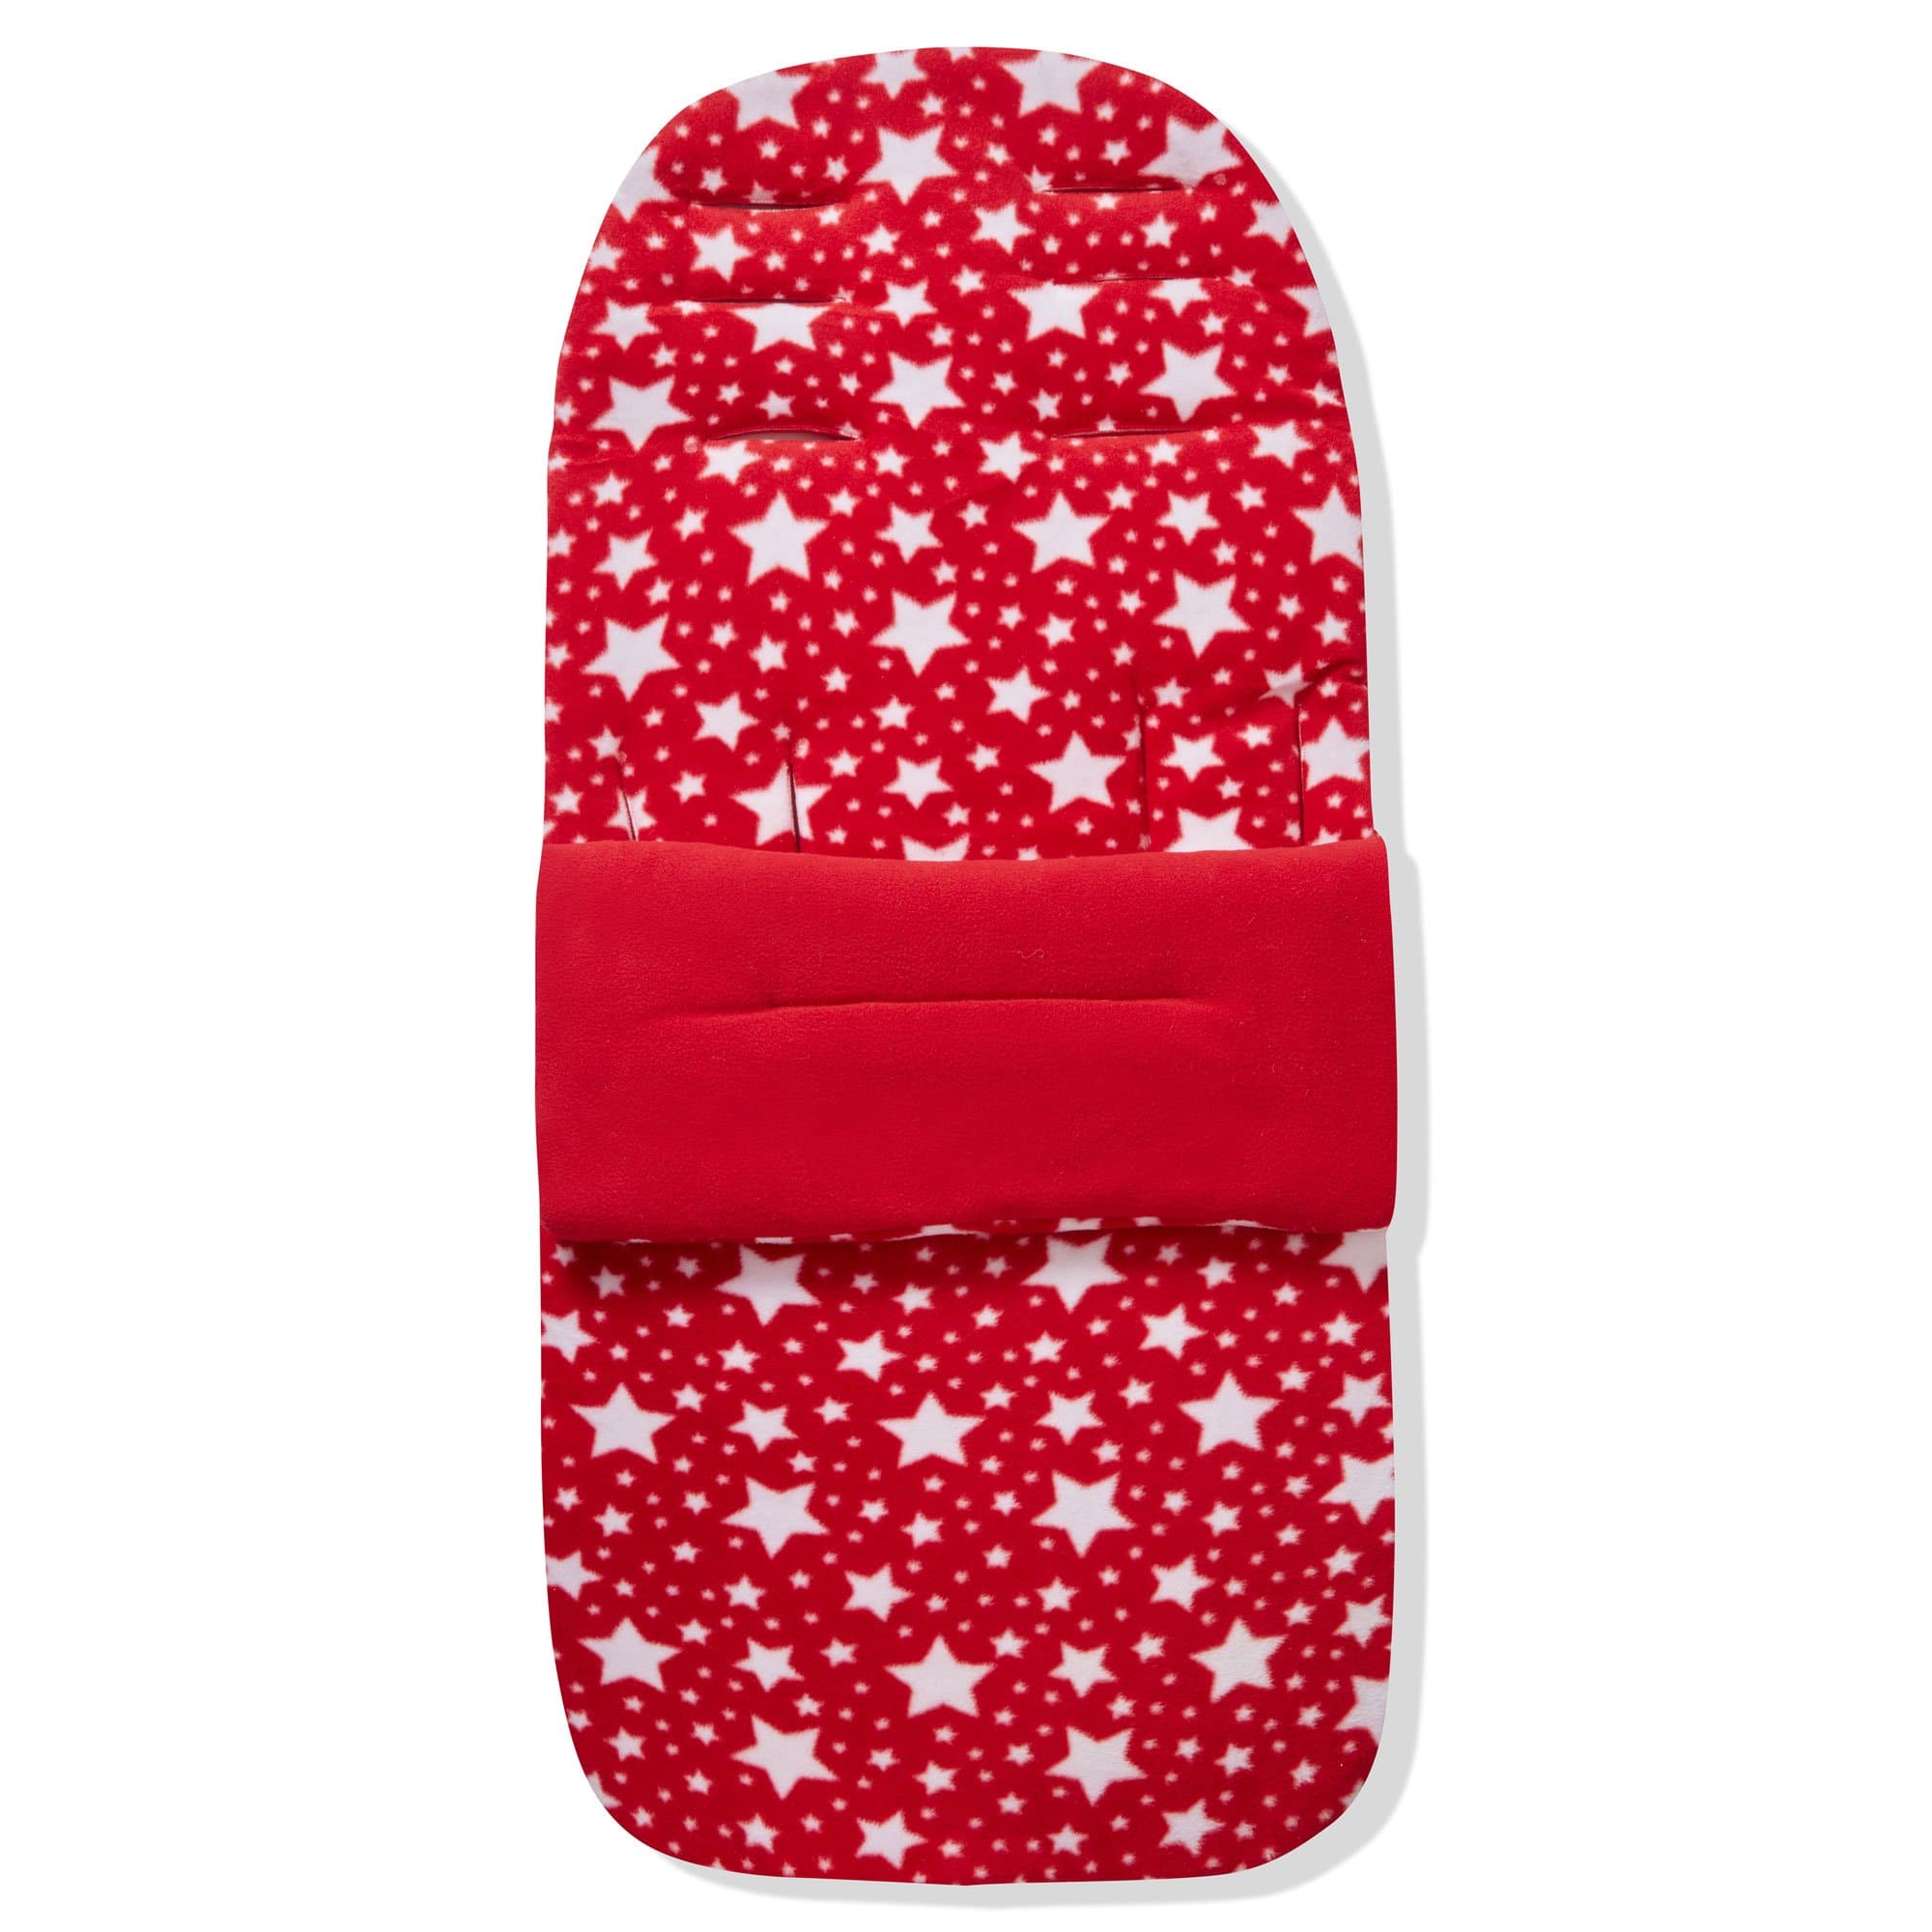 Fleece Footmuff / Cosy Toes Compatible with Formula - Red Star / Fits All Models | For Your Little One